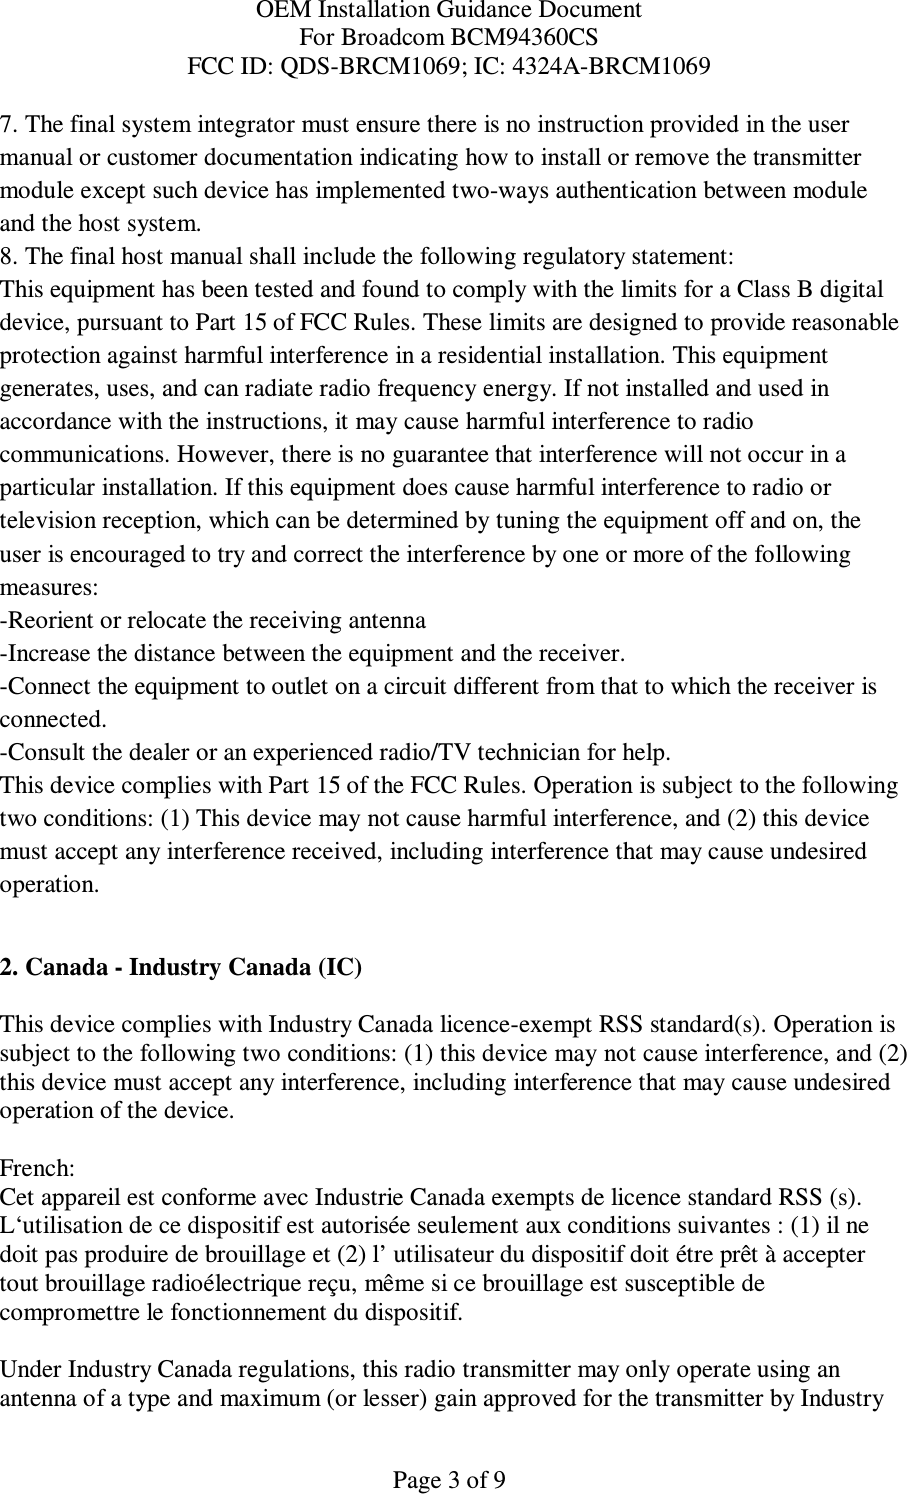 OEM Installation Guidance Document For Broadcom BCM94360CS FCC ID: QDS-BRCM1069; IC: 4324A-BRCM1069  Page 3 of 9 7. The final system integrator must ensure there is no instruction provided in the user manual or customer documentation indicating how to install or remove the transmitter module except such device has implemented two-ways authentication between module and the host system. 8. The final host manual shall include the following regulatory statement: This equipment has been tested and found to comply with the limits for a Class B digital device, pursuant to Part 15 of FCC Rules. These limits are designed to provide reasonable protection against harmful interference in a residential installation. This equipment generates, uses, and can radiate radio frequency energy. If not installed and used in accordance with the instructions, it may cause harmful interference to radio communications. However, there is no guarantee that interference will not occur in a particular installation. If this equipment does cause harmful interference to radio or television reception, which can be determined by tuning the equipment off and on, the user is encouraged to try and correct the interference by one or more of the following measures: -Reorient or relocate the receiving antenna -Increase the distance between the equipment and the receiver. -Connect the equipment to outlet on a circuit different from that to which the receiver is connected. -Consult the dealer or an experienced radio/TV technician for help. This device complies with Part 15 of the FCC Rules. Operation is subject to the following two conditions: (1) This device may not cause harmful interference, and (2) this device must accept any interference received, including interference that may cause undesired operation.  2. Canada - Industry Canada (IC)  This device complies with Industry Canada licence-exempt RSS standard(s). Operation is subject to the following two conditions: (1) this device may not cause interference, and (2) this device must accept any interference, including interference that may cause undesired operation of the device.  French:  Cet appareil est conforme avec Industrie Canada exempts de licence standard RSS (s). L‘utilisation de ce dispositif est autorisée seulement aux conditions suivantes : (1) il ne doit pas produire de brouillage et (2) l’ utilisateur du dispositif doit étre prêt à accepter tout brouillage radioélectrique reçu, même si ce brouillage est susceptible de compromettre le fonctionnement du dispositif.  Under Industry Canada regulations, this radio transmitter may only operate using an antenna of a type and maximum (or lesser) gain approved for the transmitter by Industry 